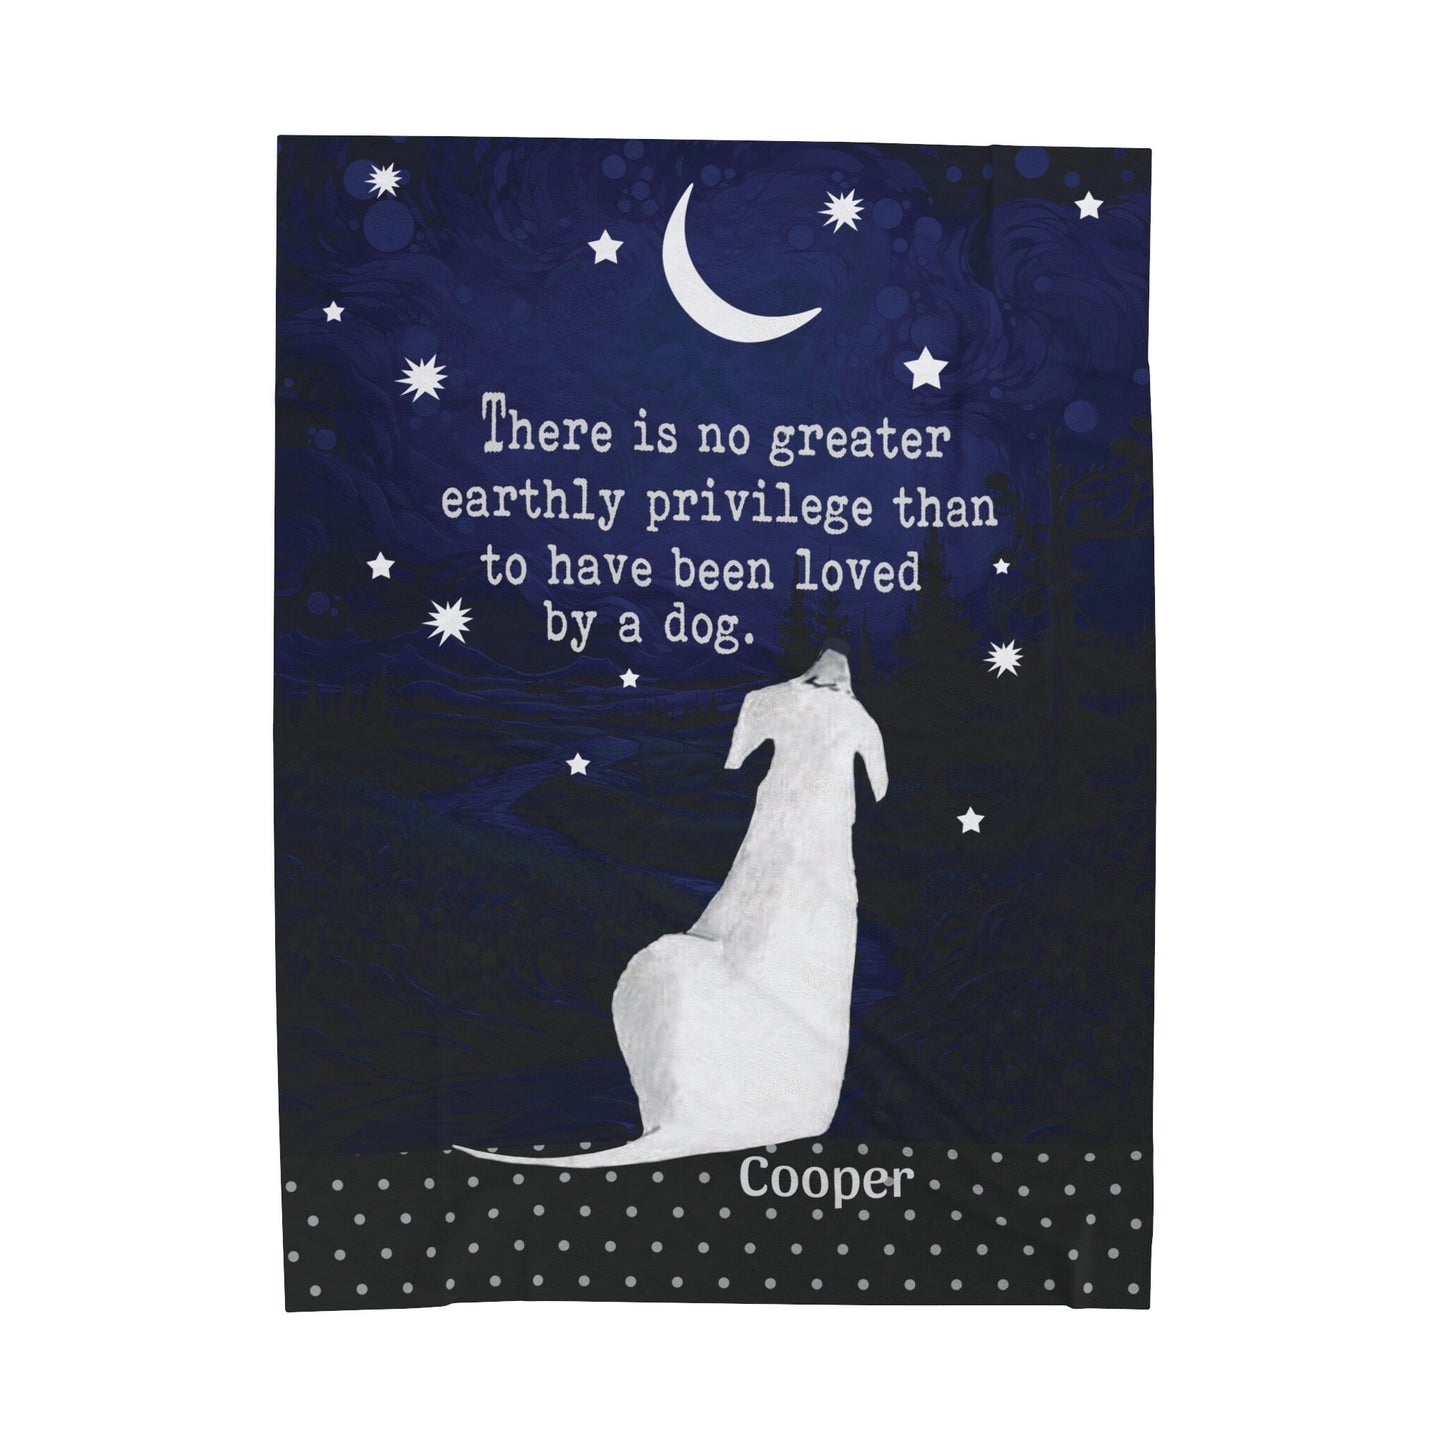 Dog Memorial Blanket, There Is No Greater Earthly Privilege Than Love of A Dog Plush Velveteen Throw Blanket, Custom Dog Memory Gift for Mom